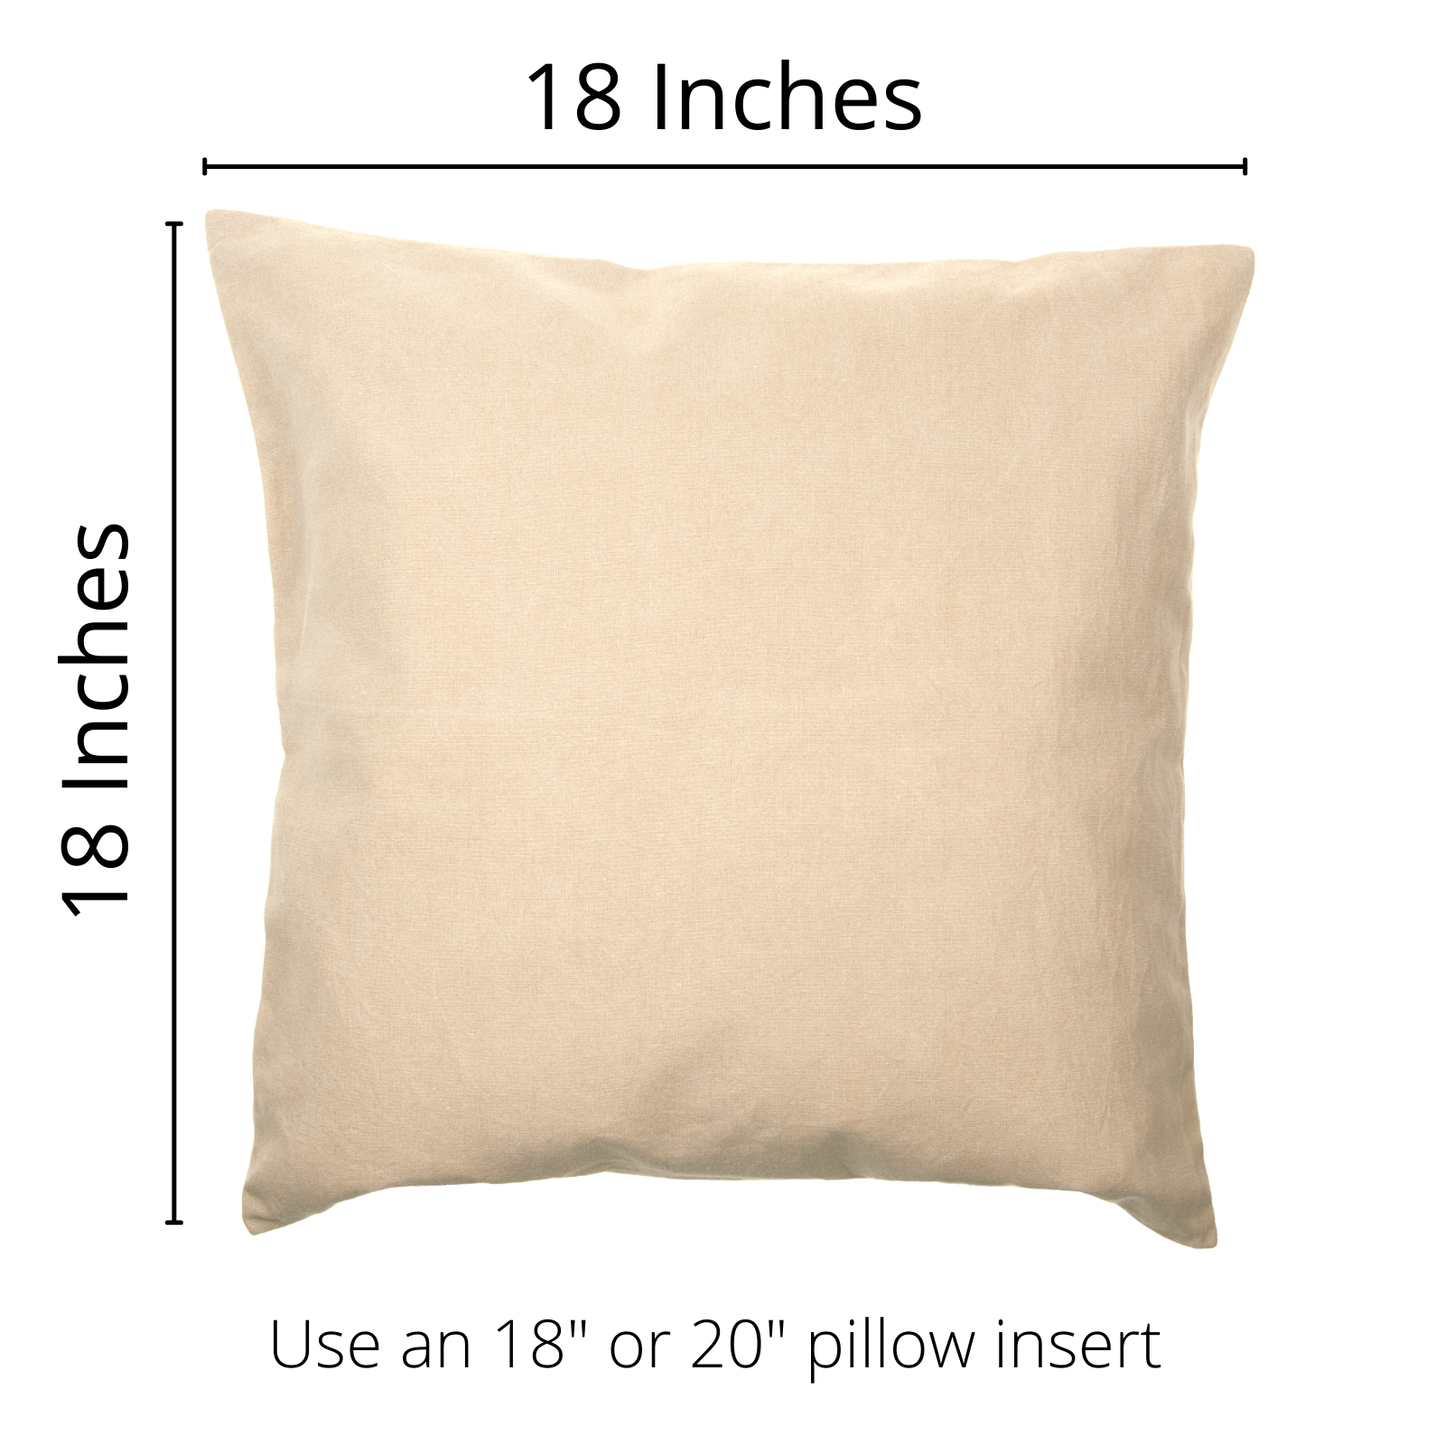 Let Your Light Shine Pillow Cover